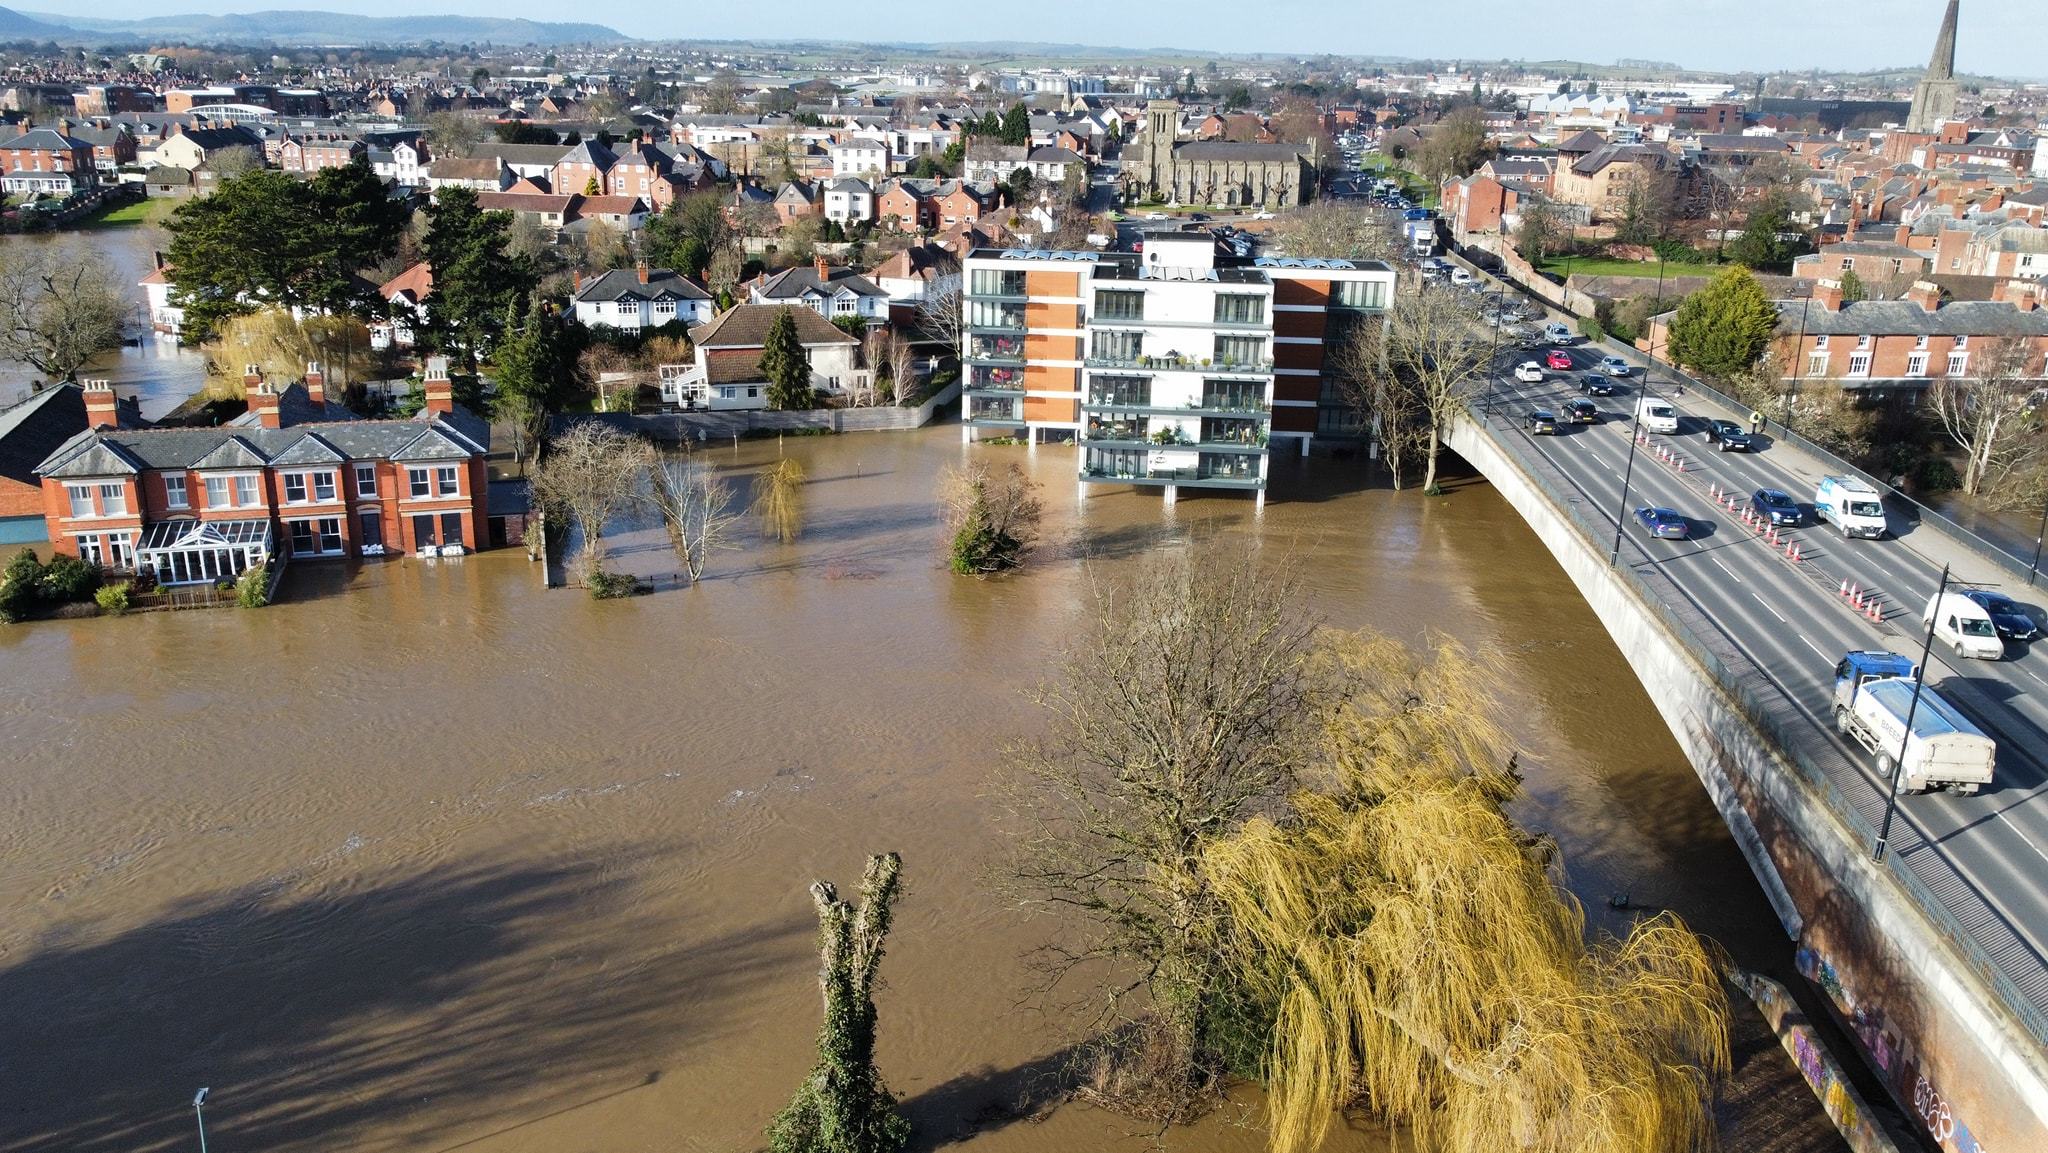 Storm Franklin flooding February 2022: The river Wye swelled and reached a heigh of almost 5.4 metres in Hereford at the Old Bridge, flooding nearby homes. Picture: Jan Laudar Sabo